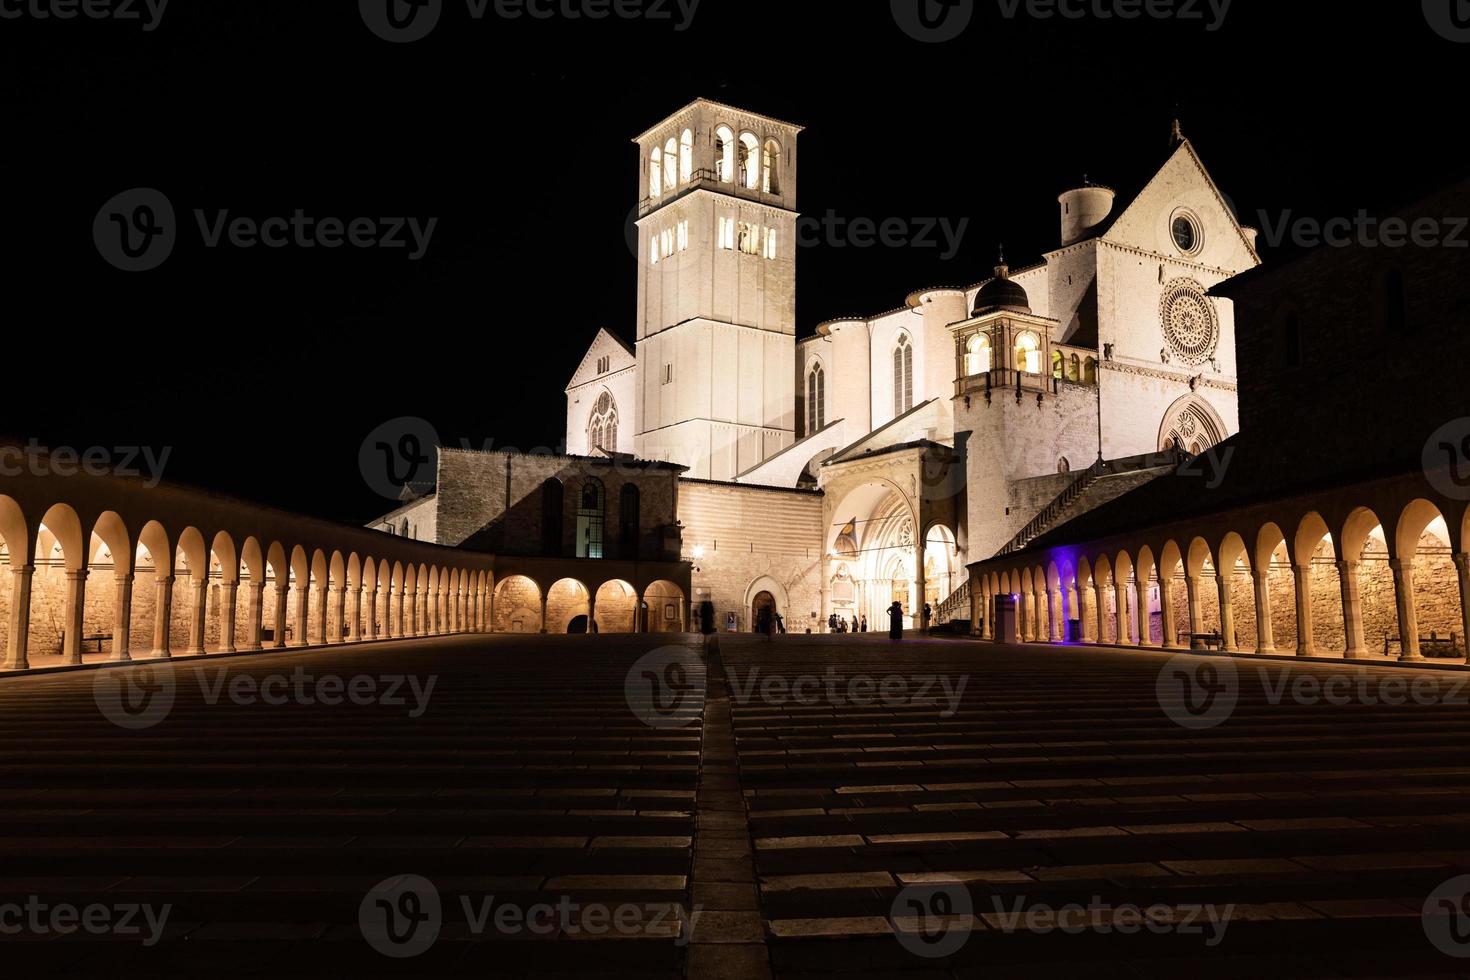 Assisi Basilica by night,  Umbria region, Italy. The town is famous for the most important Italian Basilica dedicated to St. Francis - San Francesco. photo